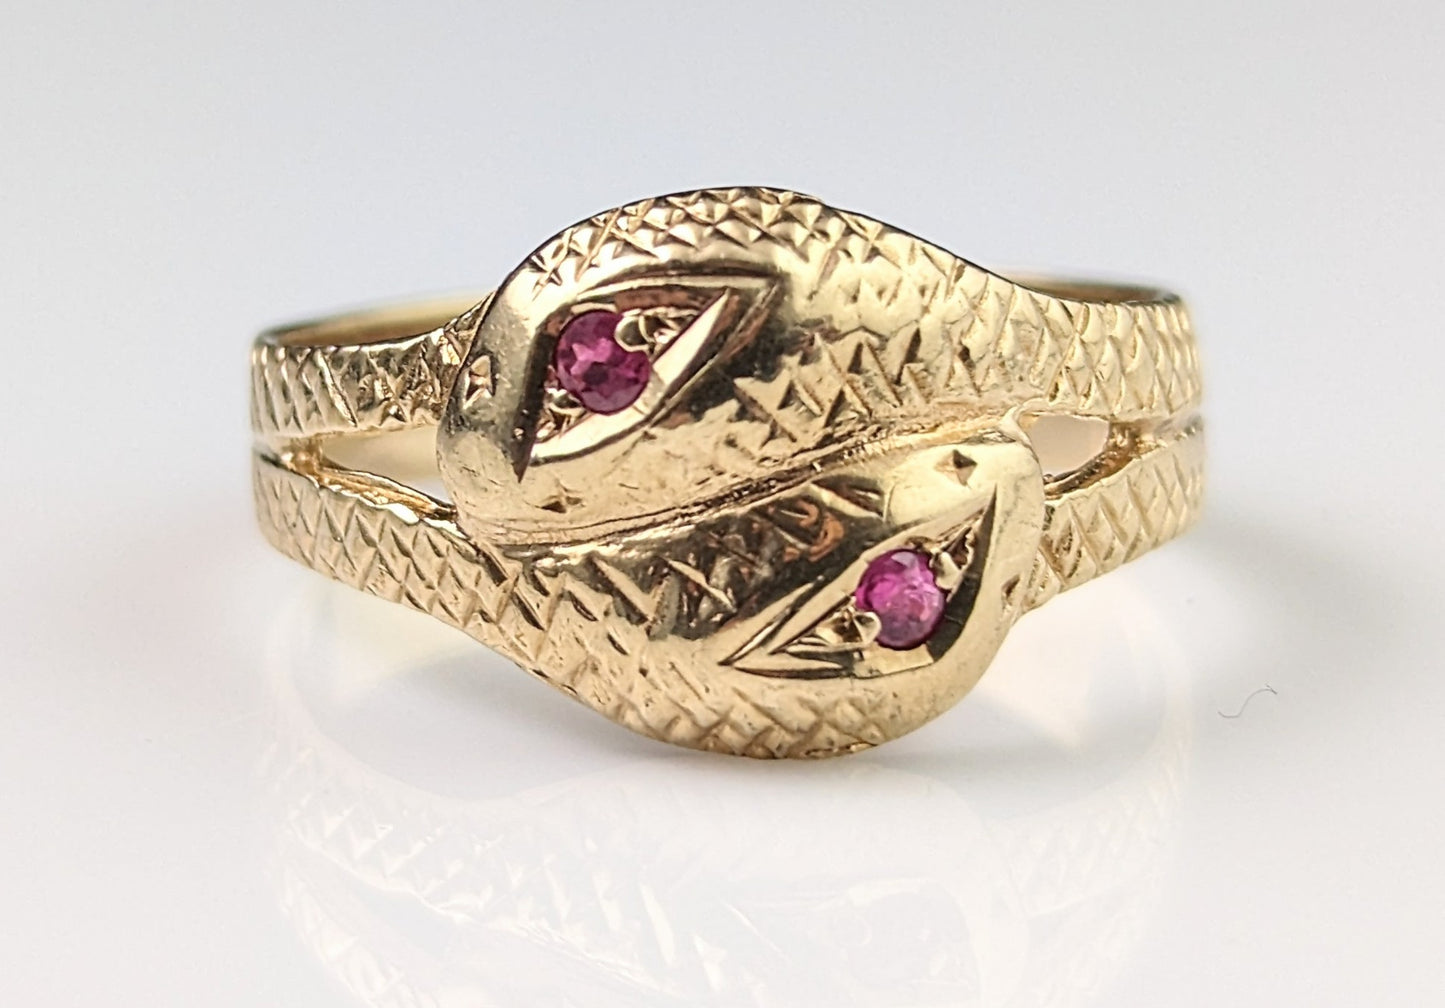 Vintage double snake ring, 9ct gold, ruby, Victorian style